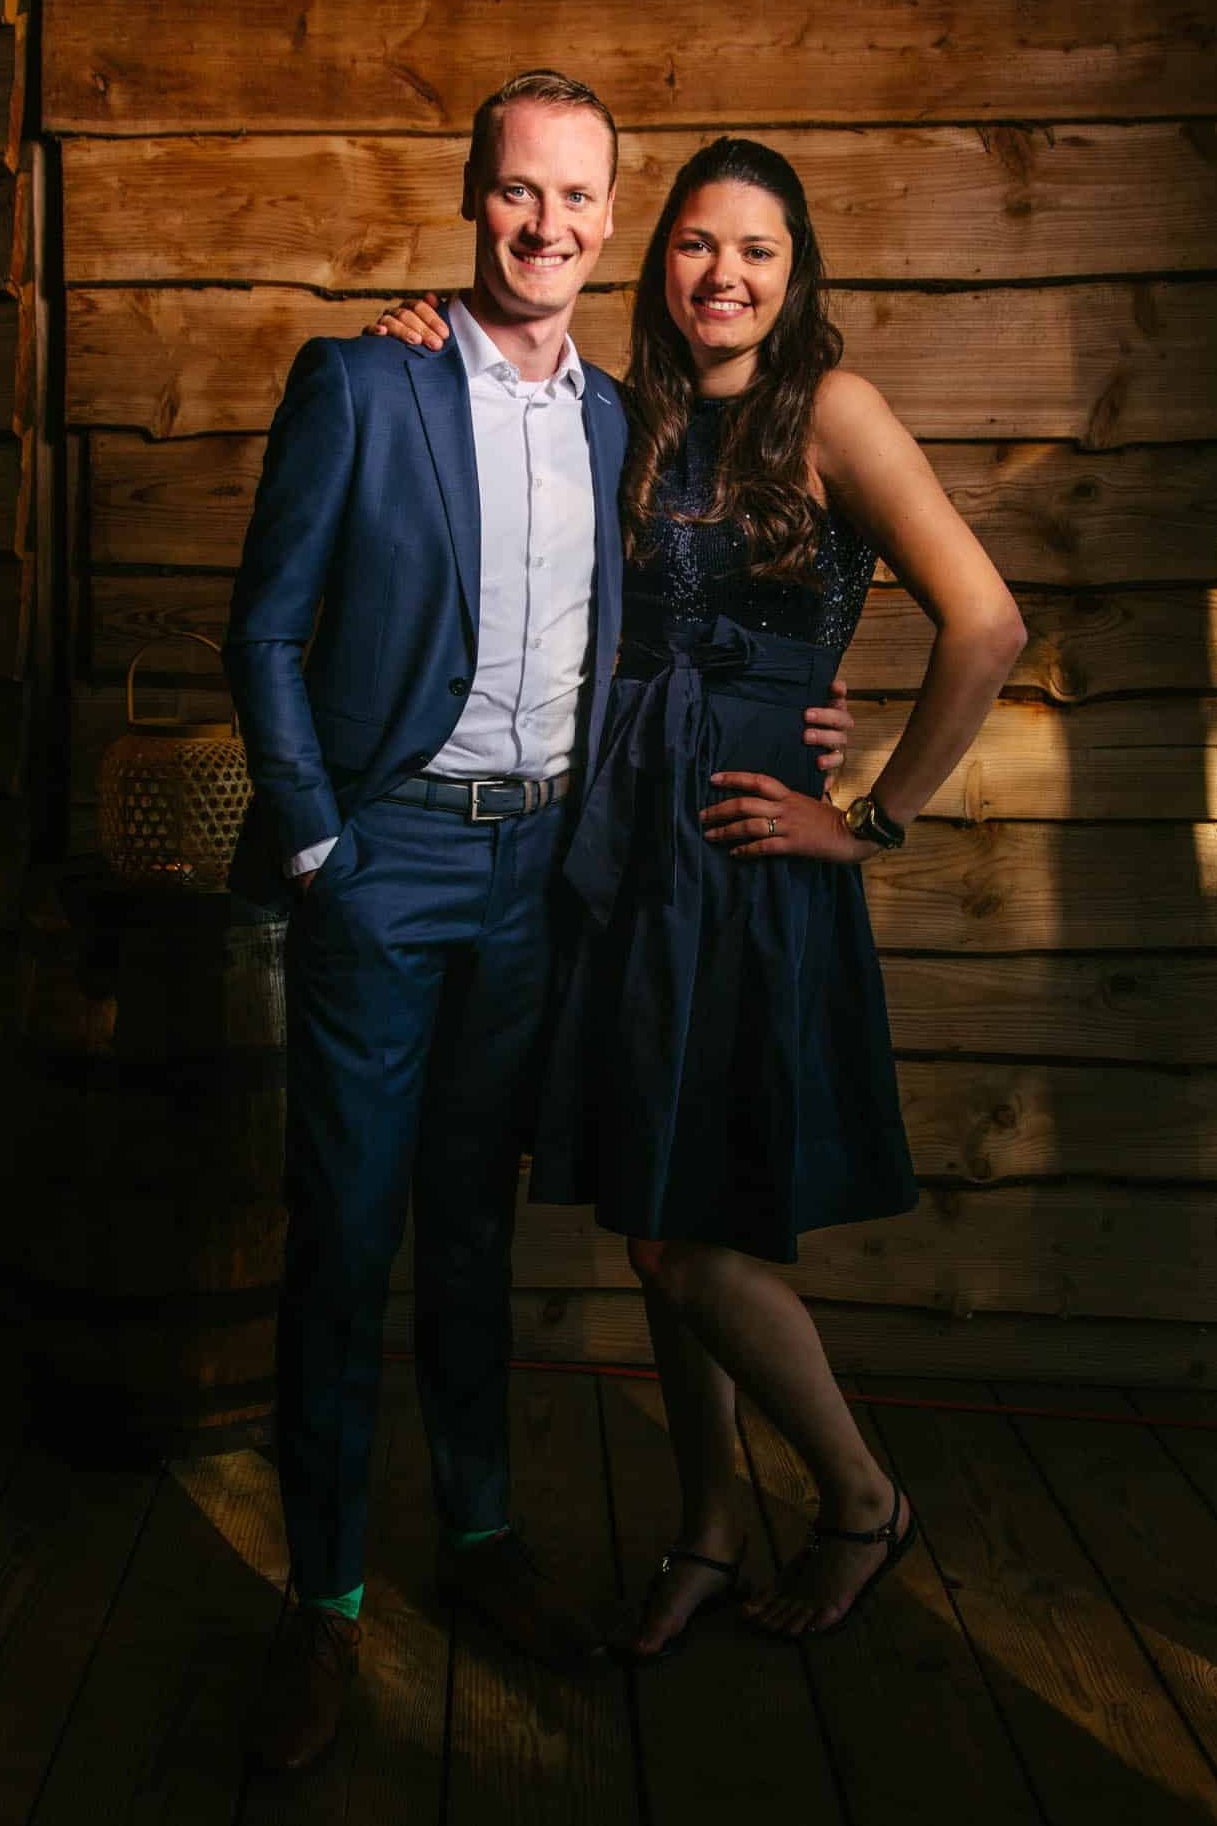 A couple dressed in Tenue de ville pose for a photo in front of a wooden wall.